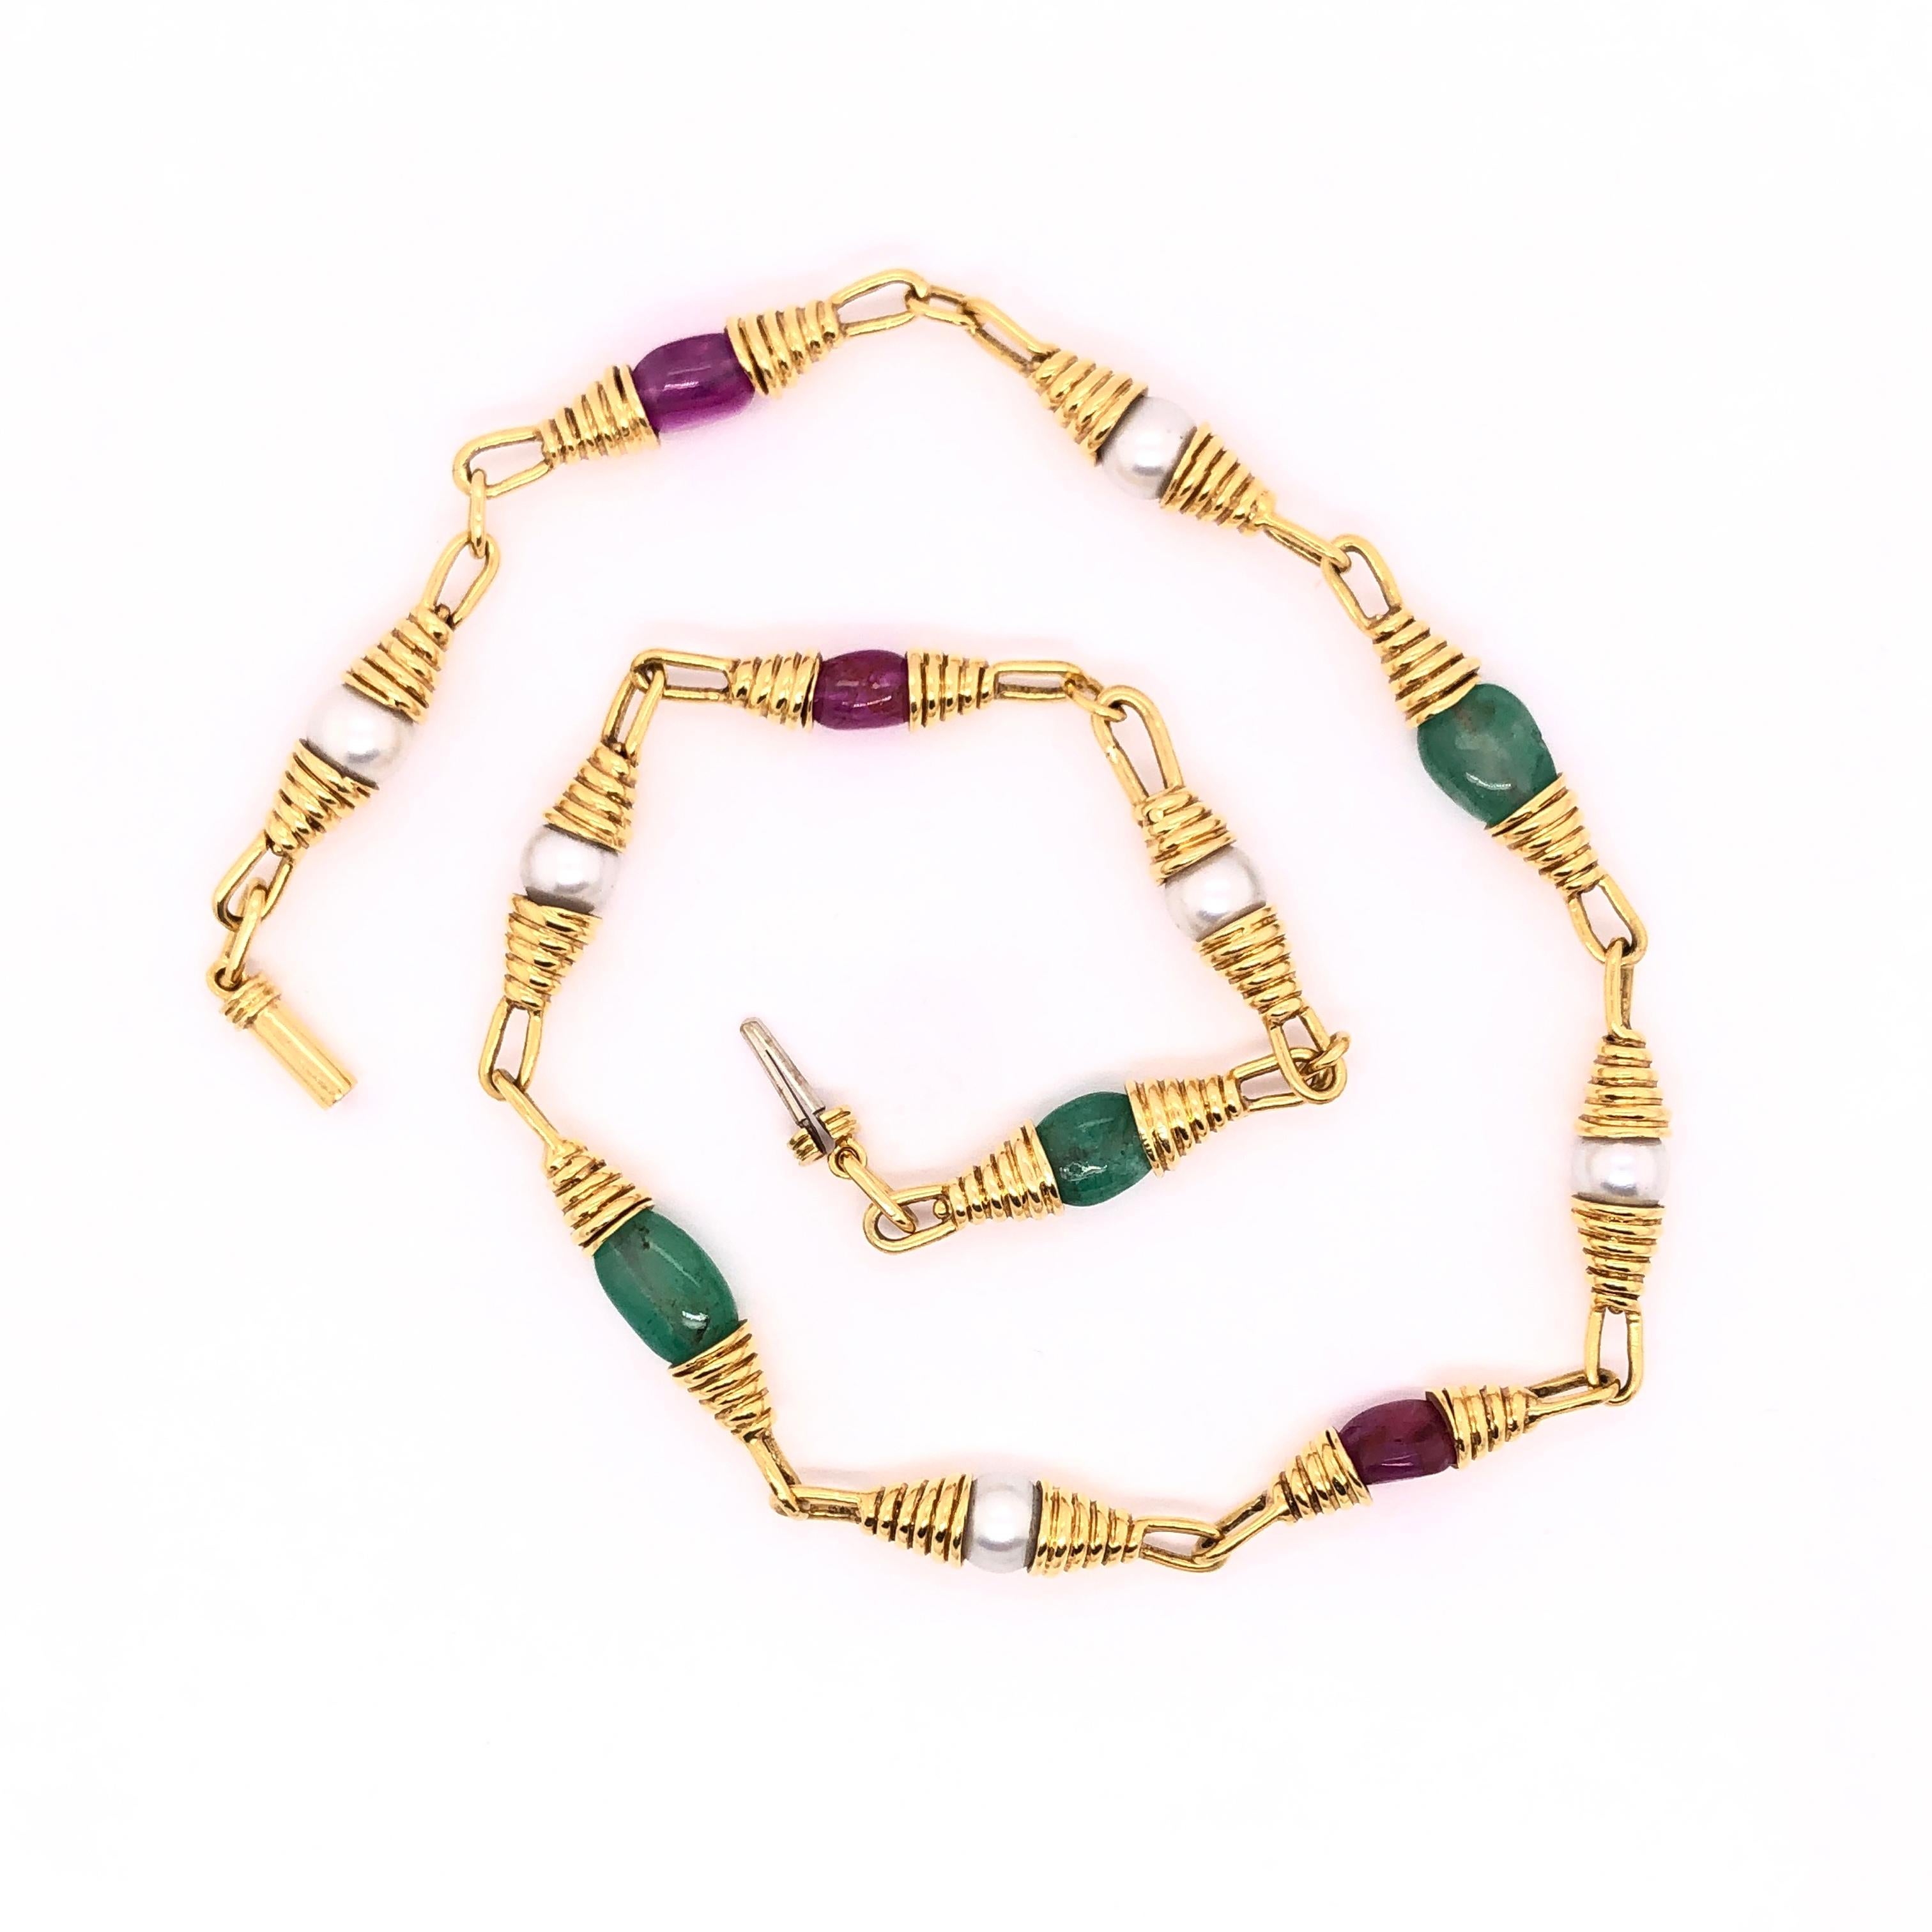 This versatile and unique necklace can be worn with your favorite pair of jeans or dress. The estimated 9.25 CTW of rubies, estimated 10 CTW of emeralds and six 7mm pearls are a sure conversation starter. At 17 inches the necklace rests nicely on